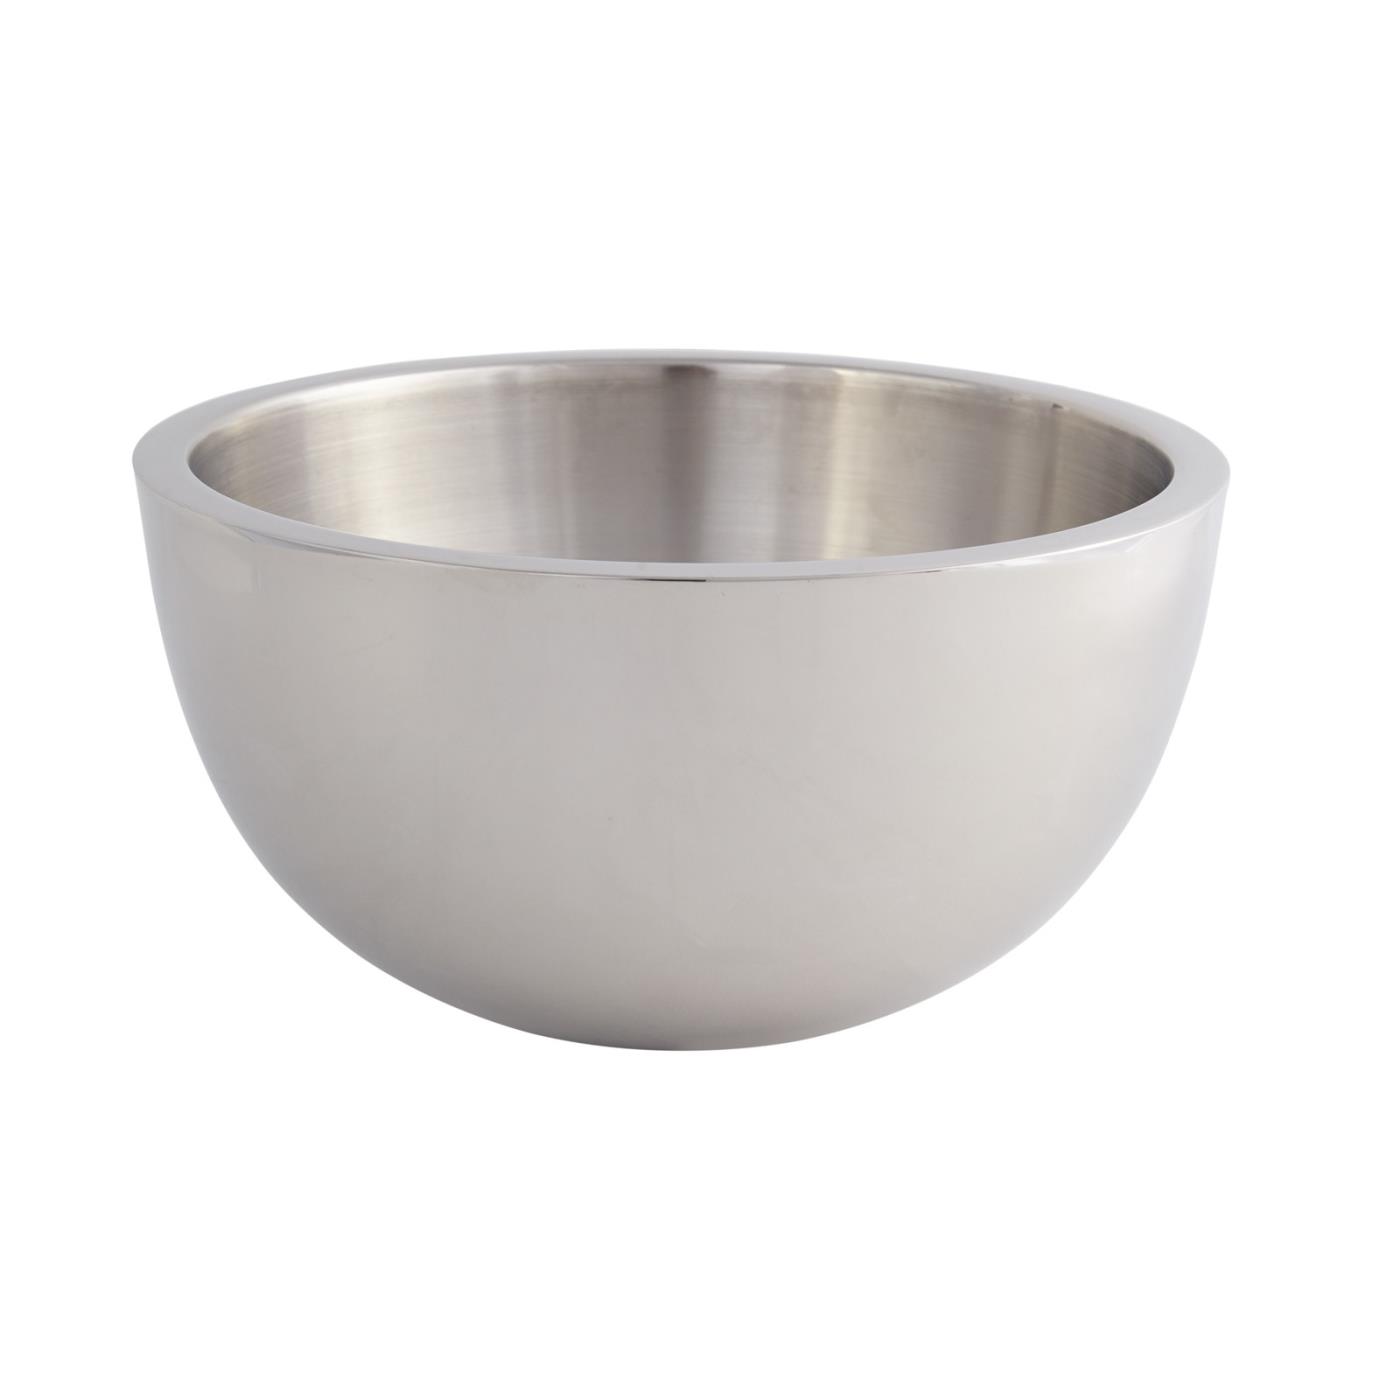 Stainless Steel Mod Bowl - 10"